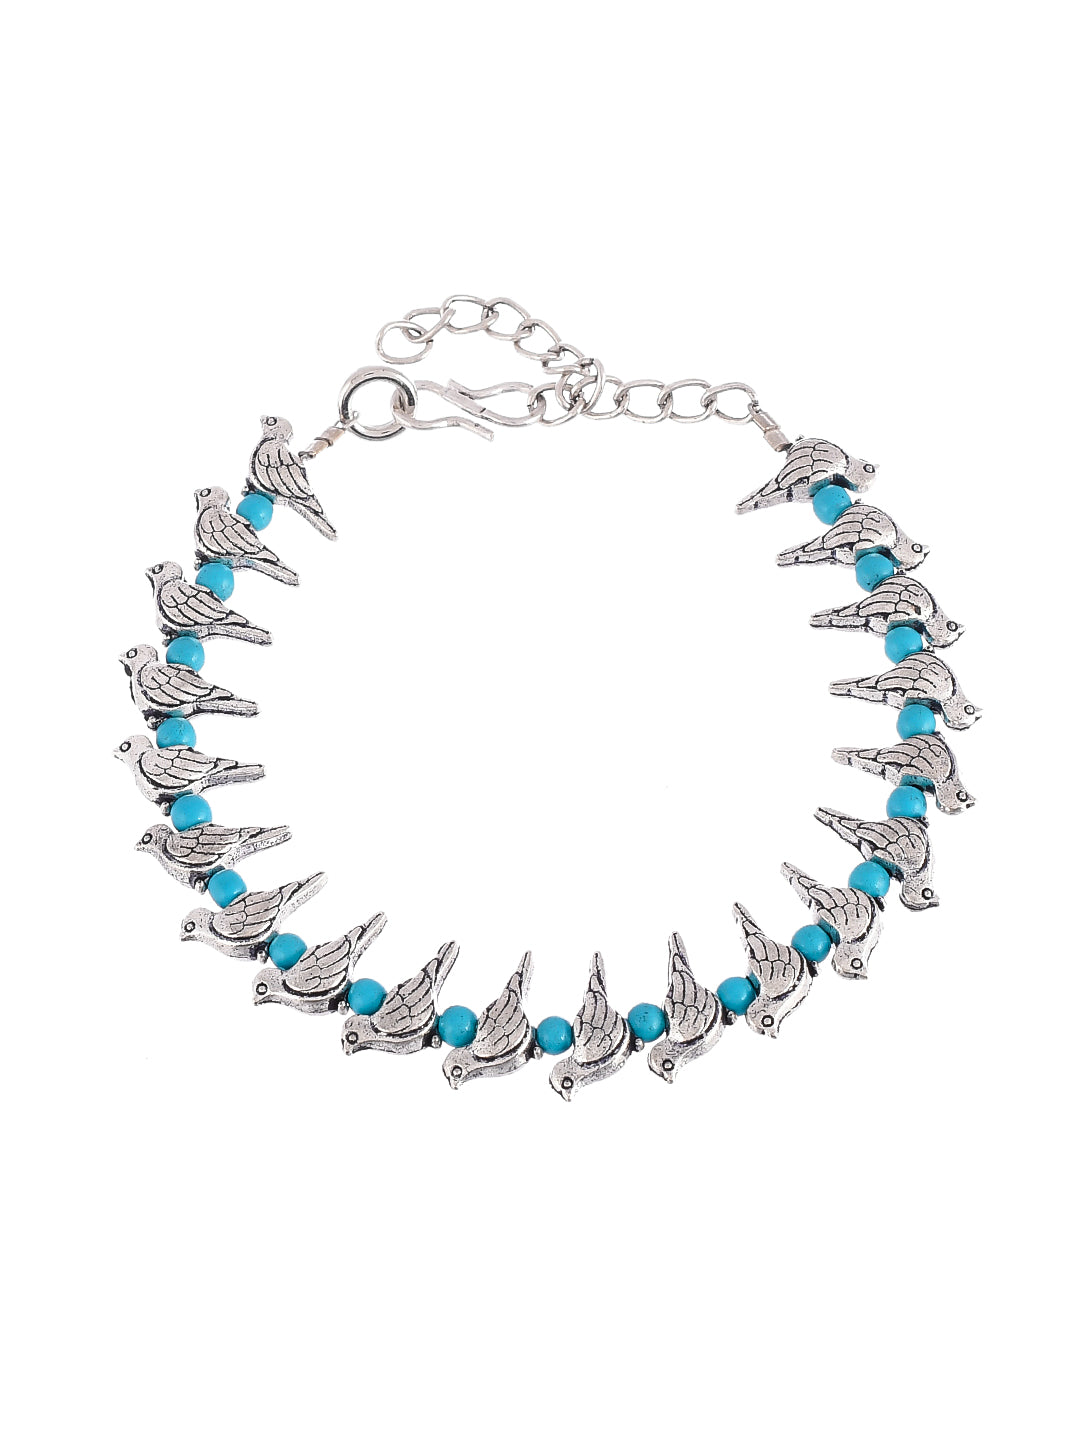 Turquoise Blue Silver Bird Anklets